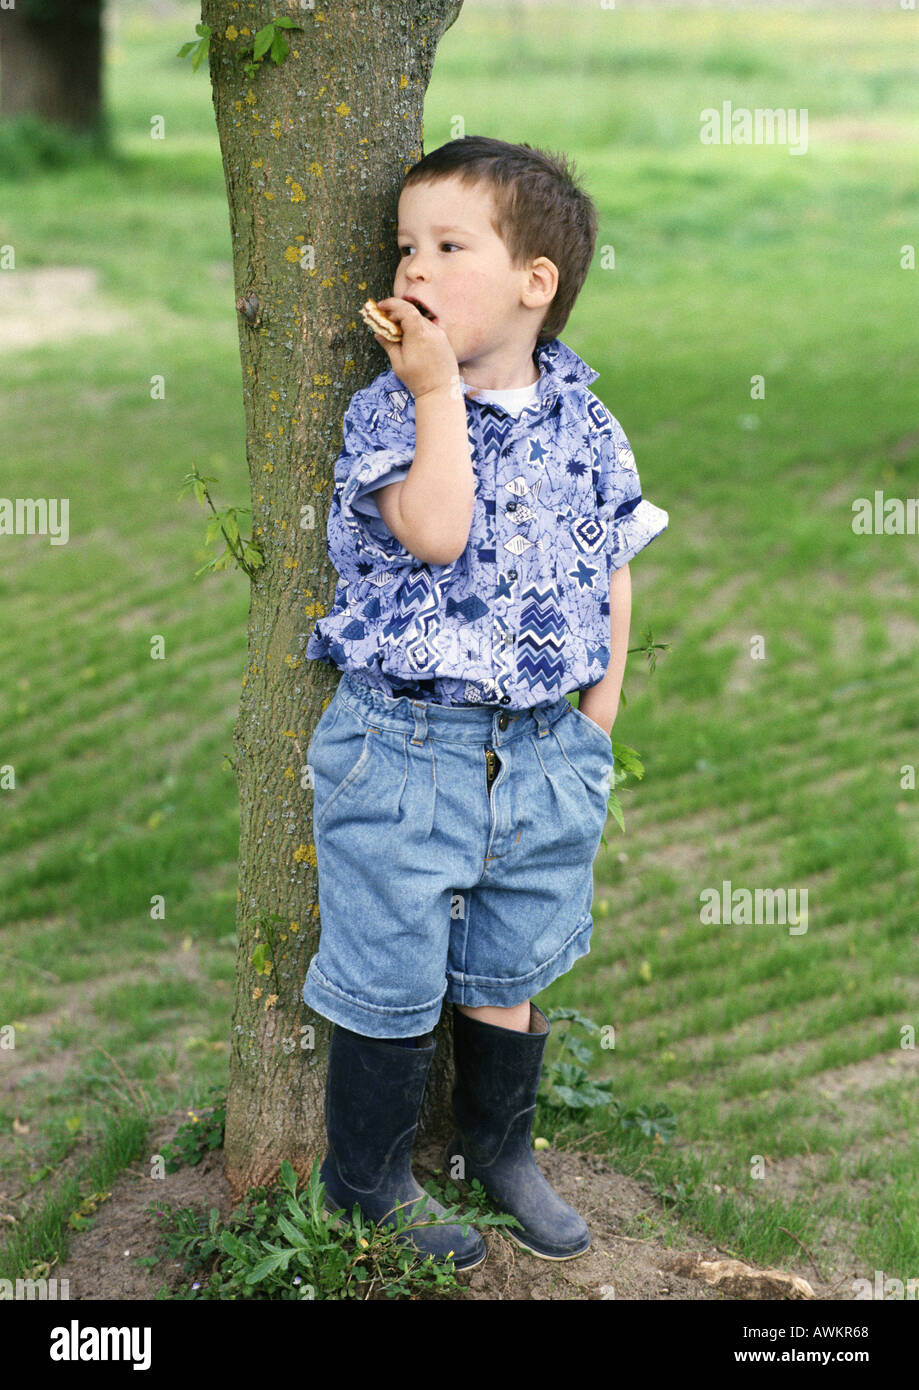 Little boy standing behind a tree Stock Photo